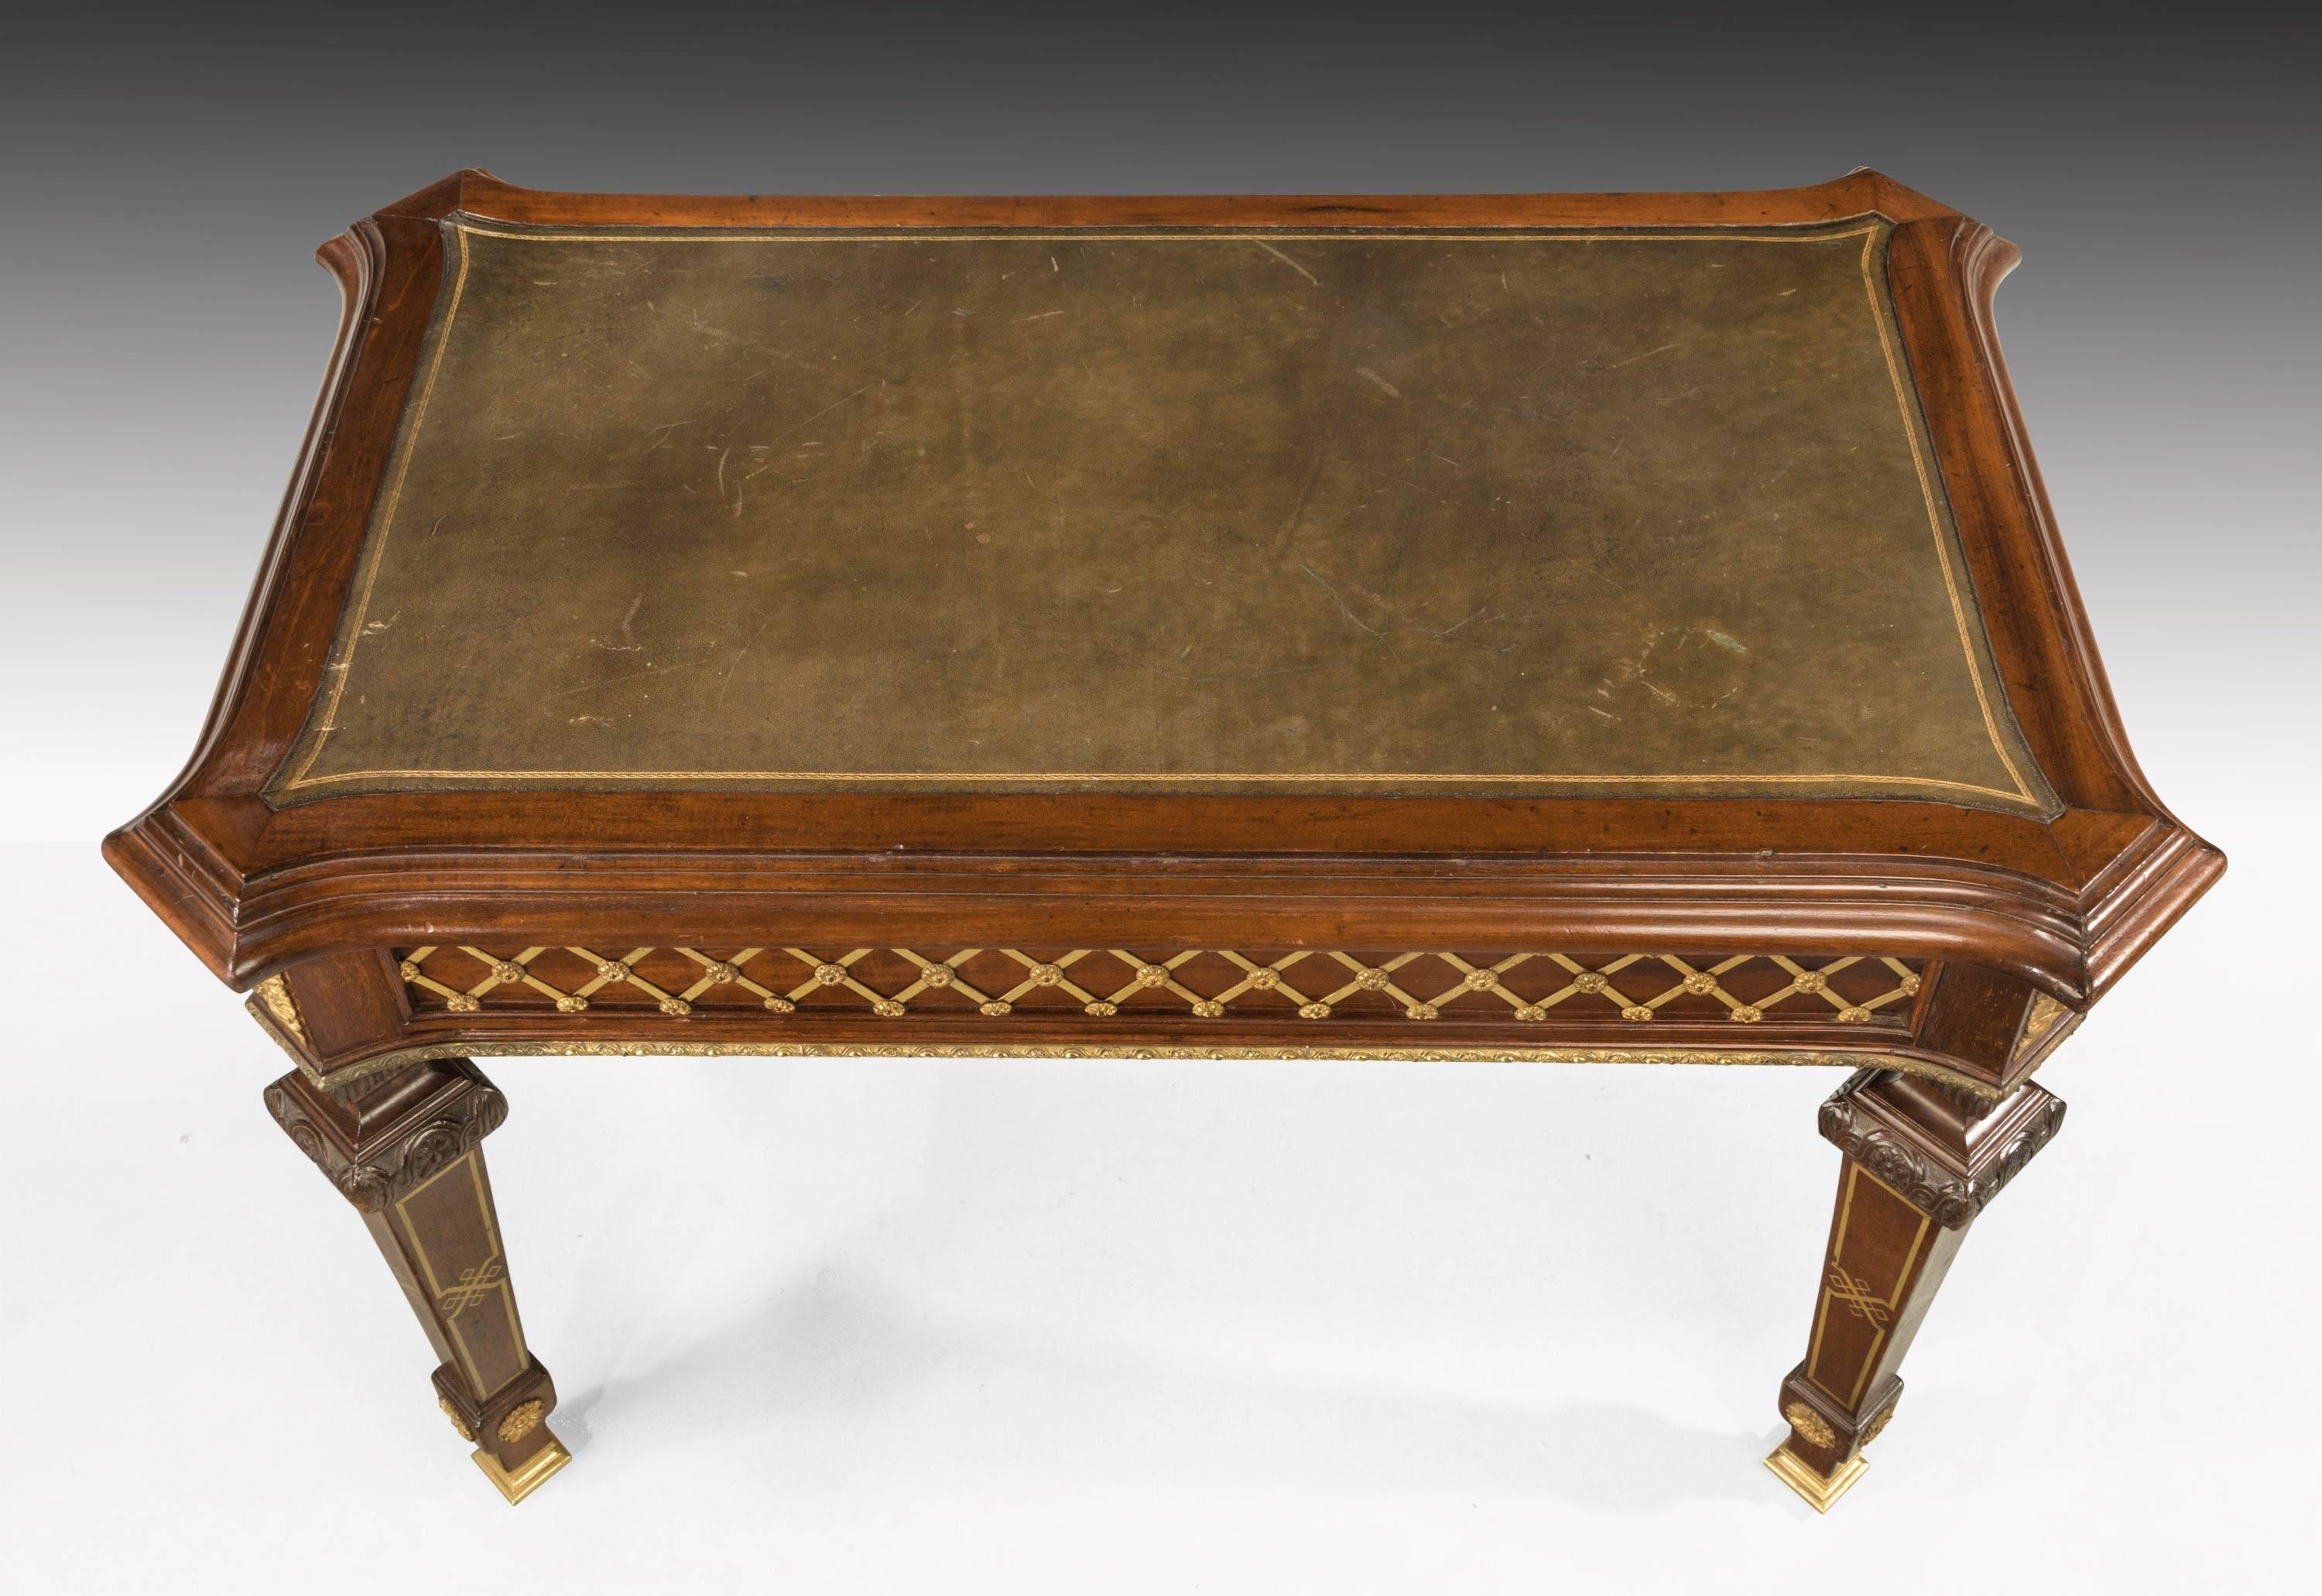 A most unusual pair of North European library tables in mahogany with inset leather tops. The whole forms finely decorated with cast gilt bronze mounts, retaining the original gilding. Square tapering supports with carved belts with finely inlaid